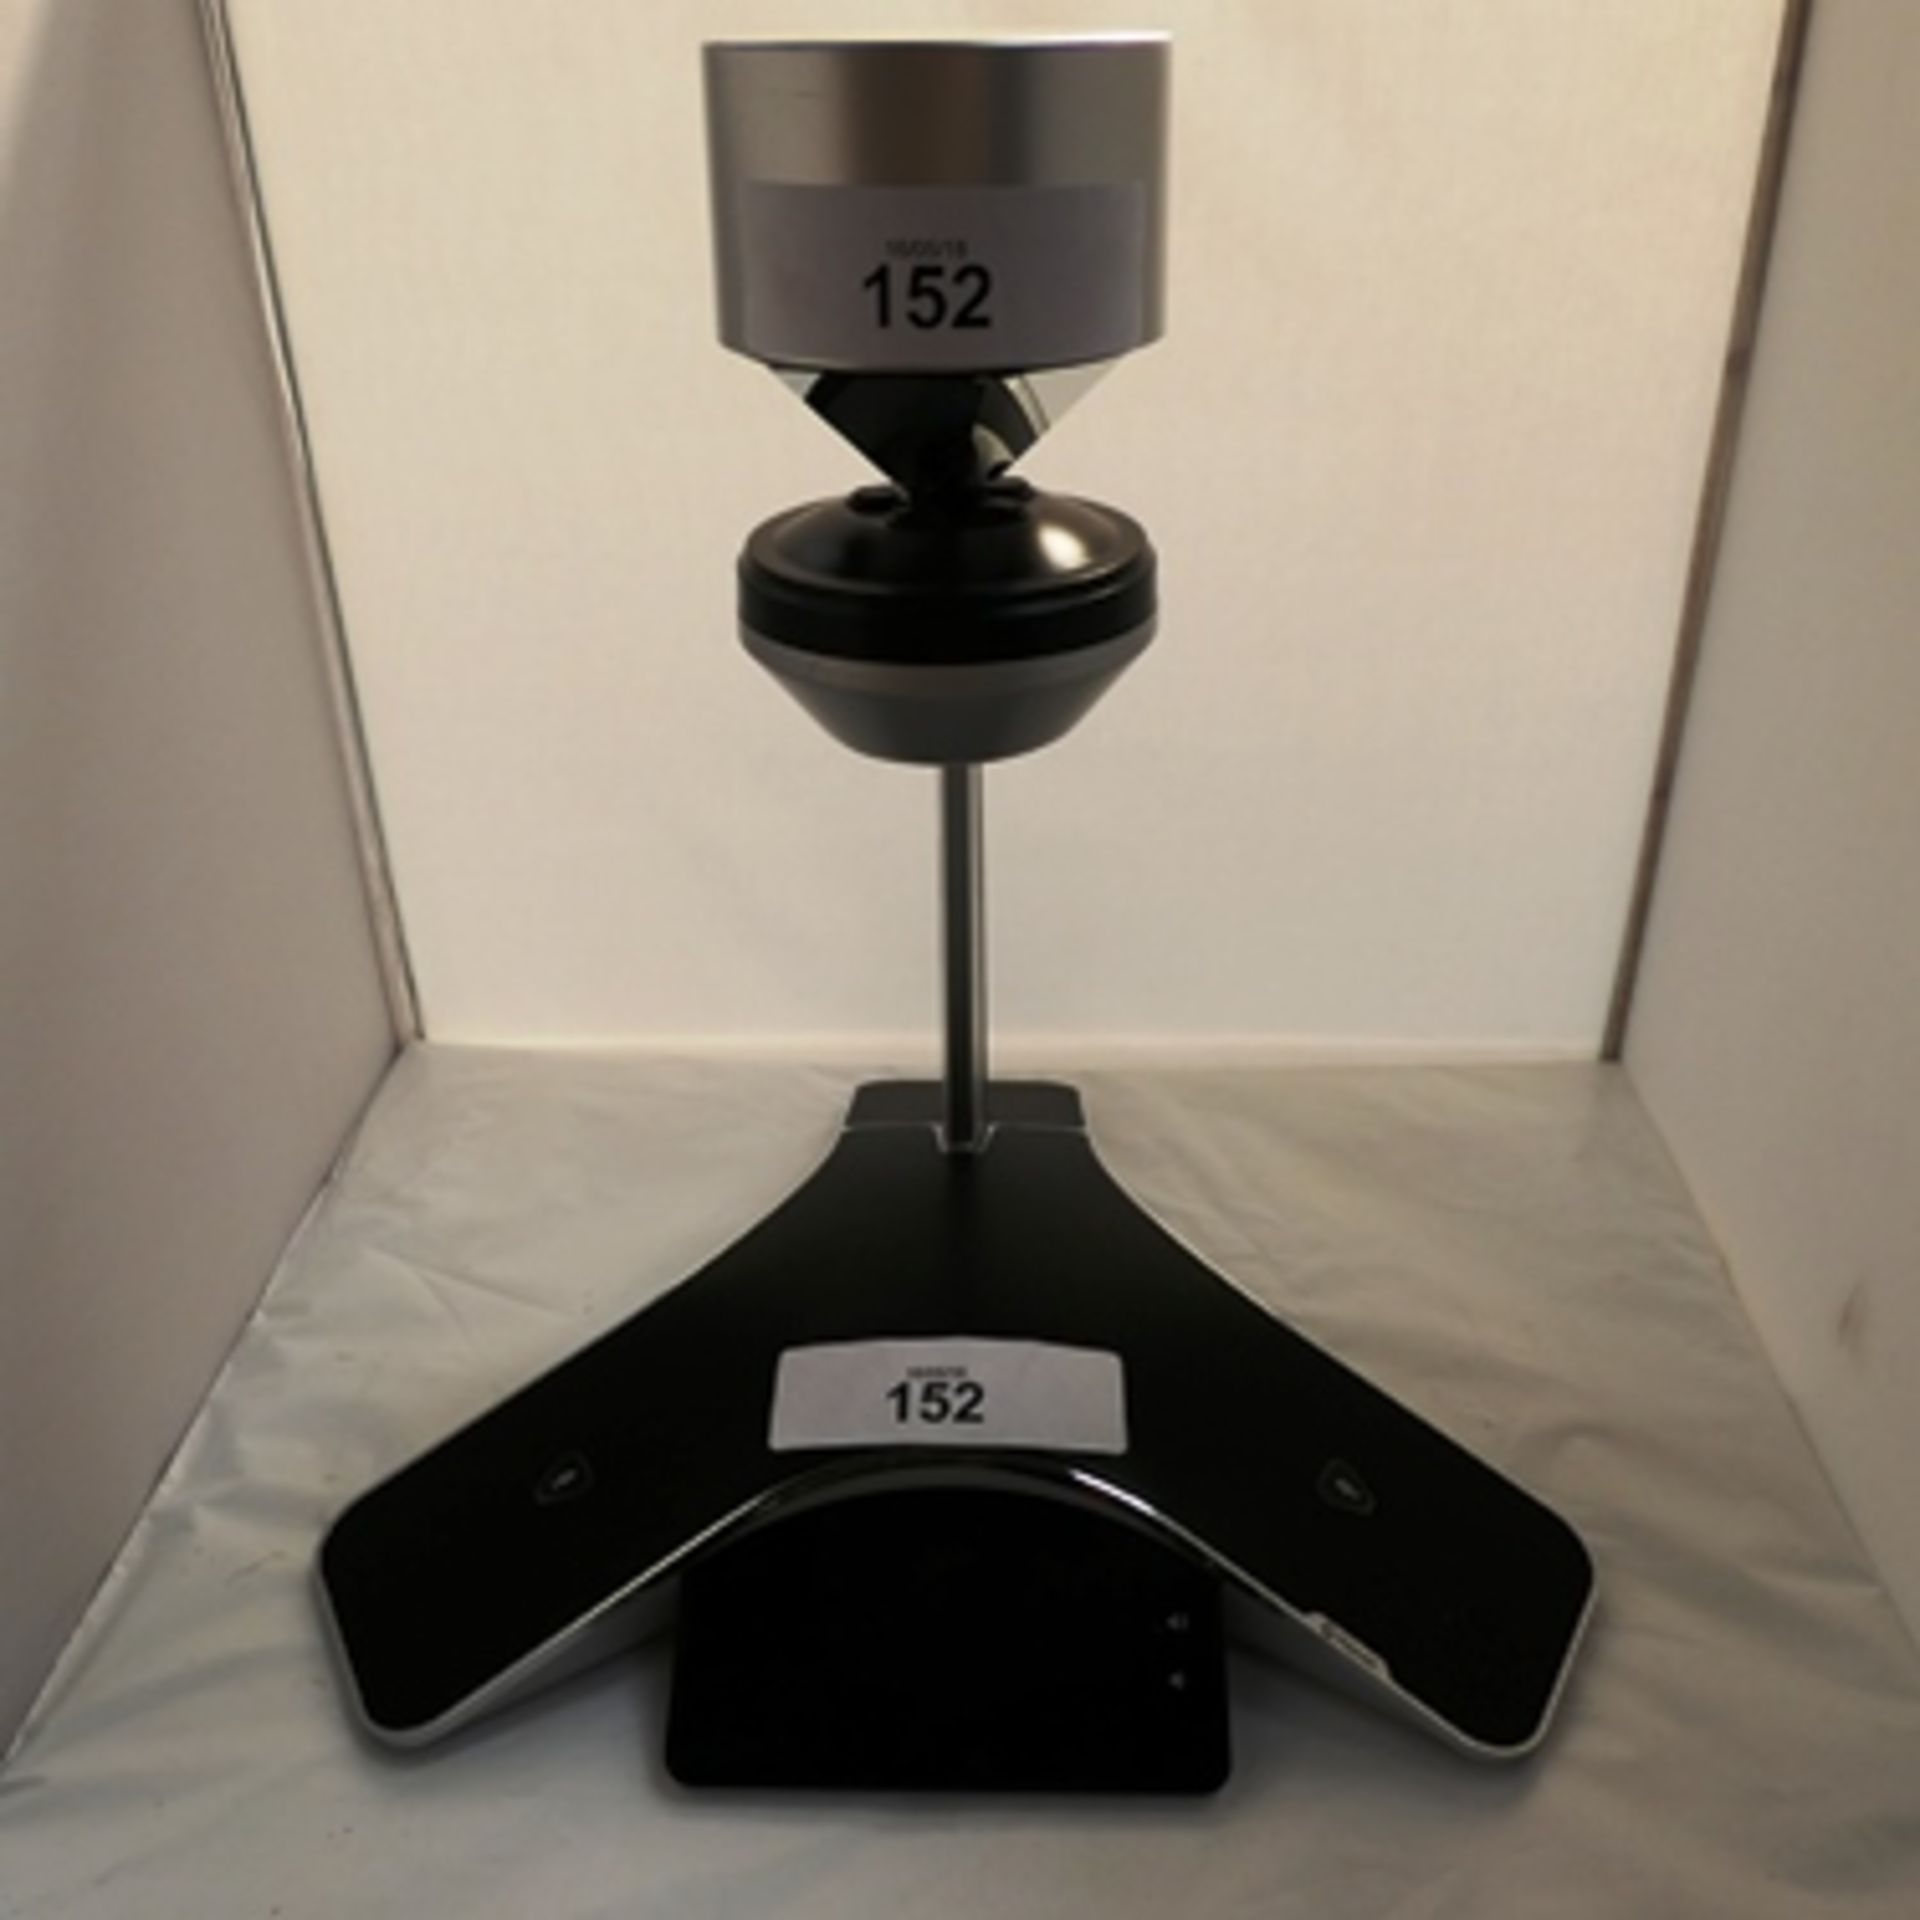 A Polycom CX5500 round table conference video calling station. Camera module only, untested